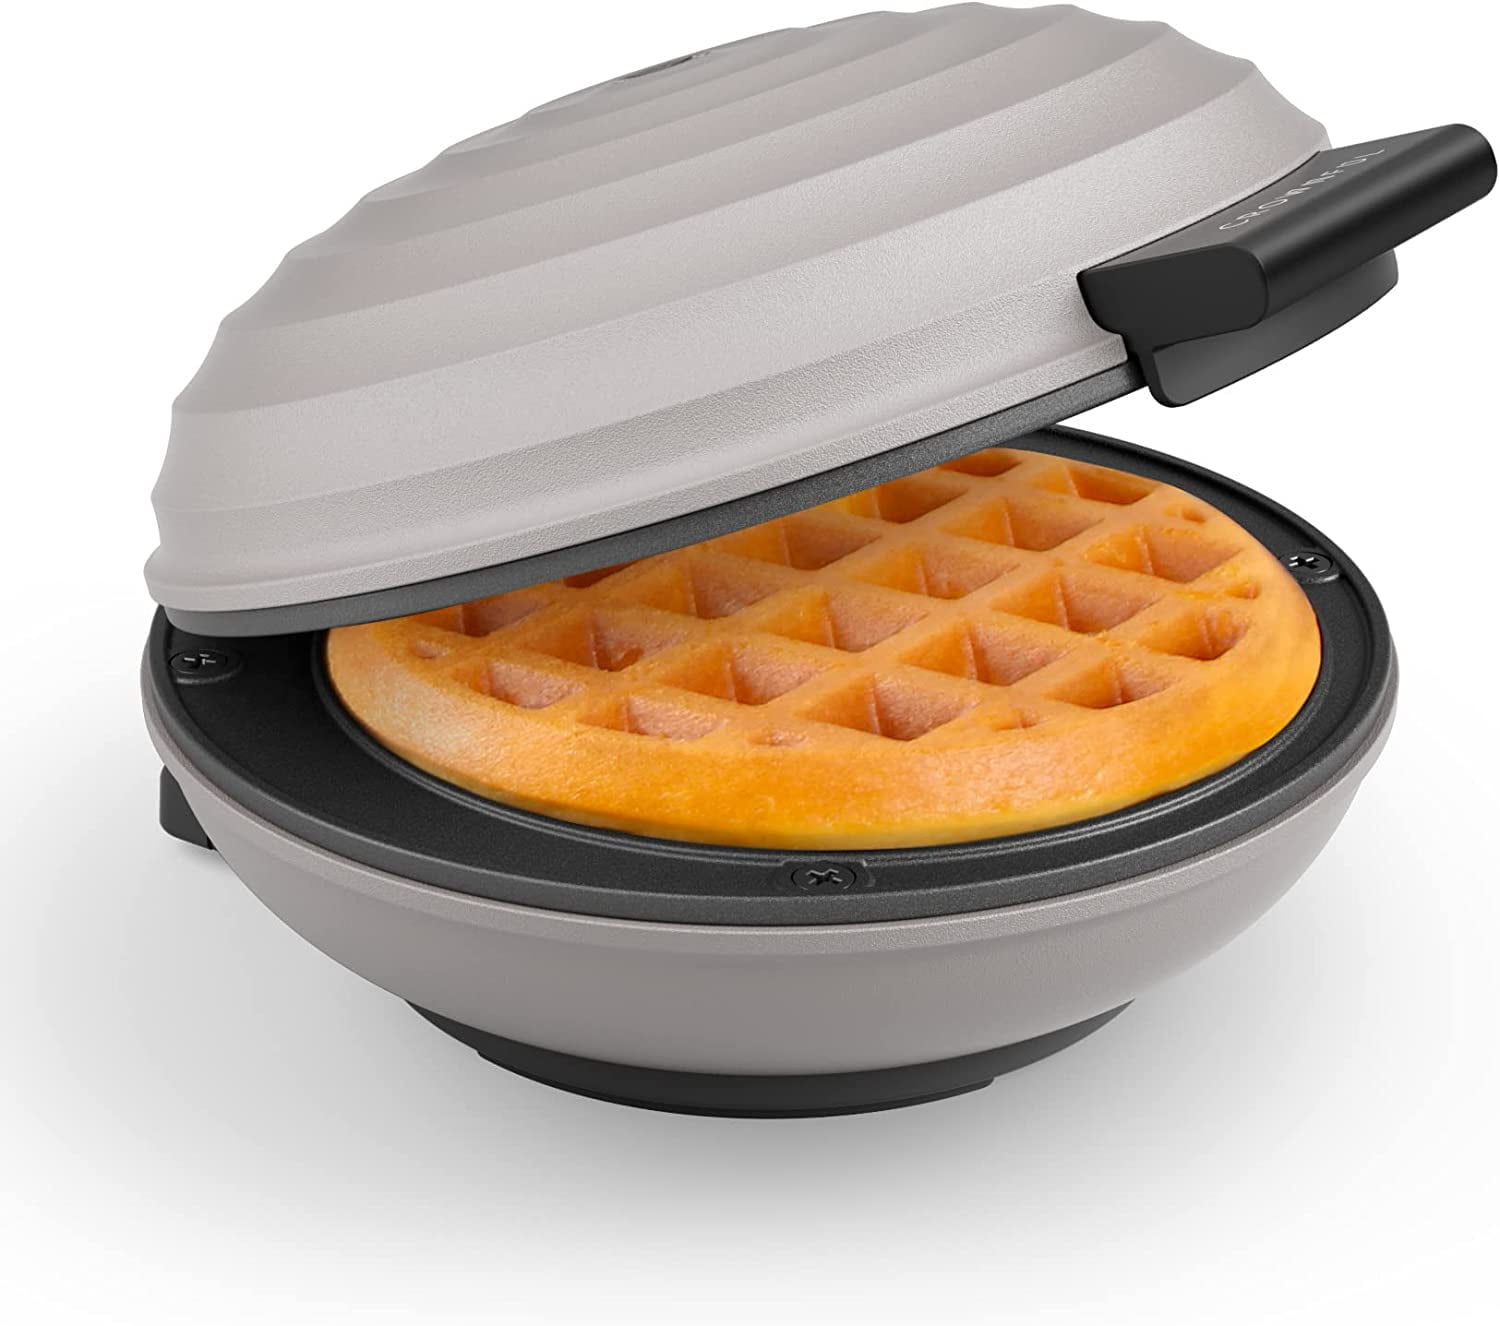  FineMade Double Mini Waffle Maker with 4 Inch Dual Non Stick  Surfaces, Excellent Small Belgian Waffle Maker Iron for Families, Kids and  Individuals: Home & Kitchen